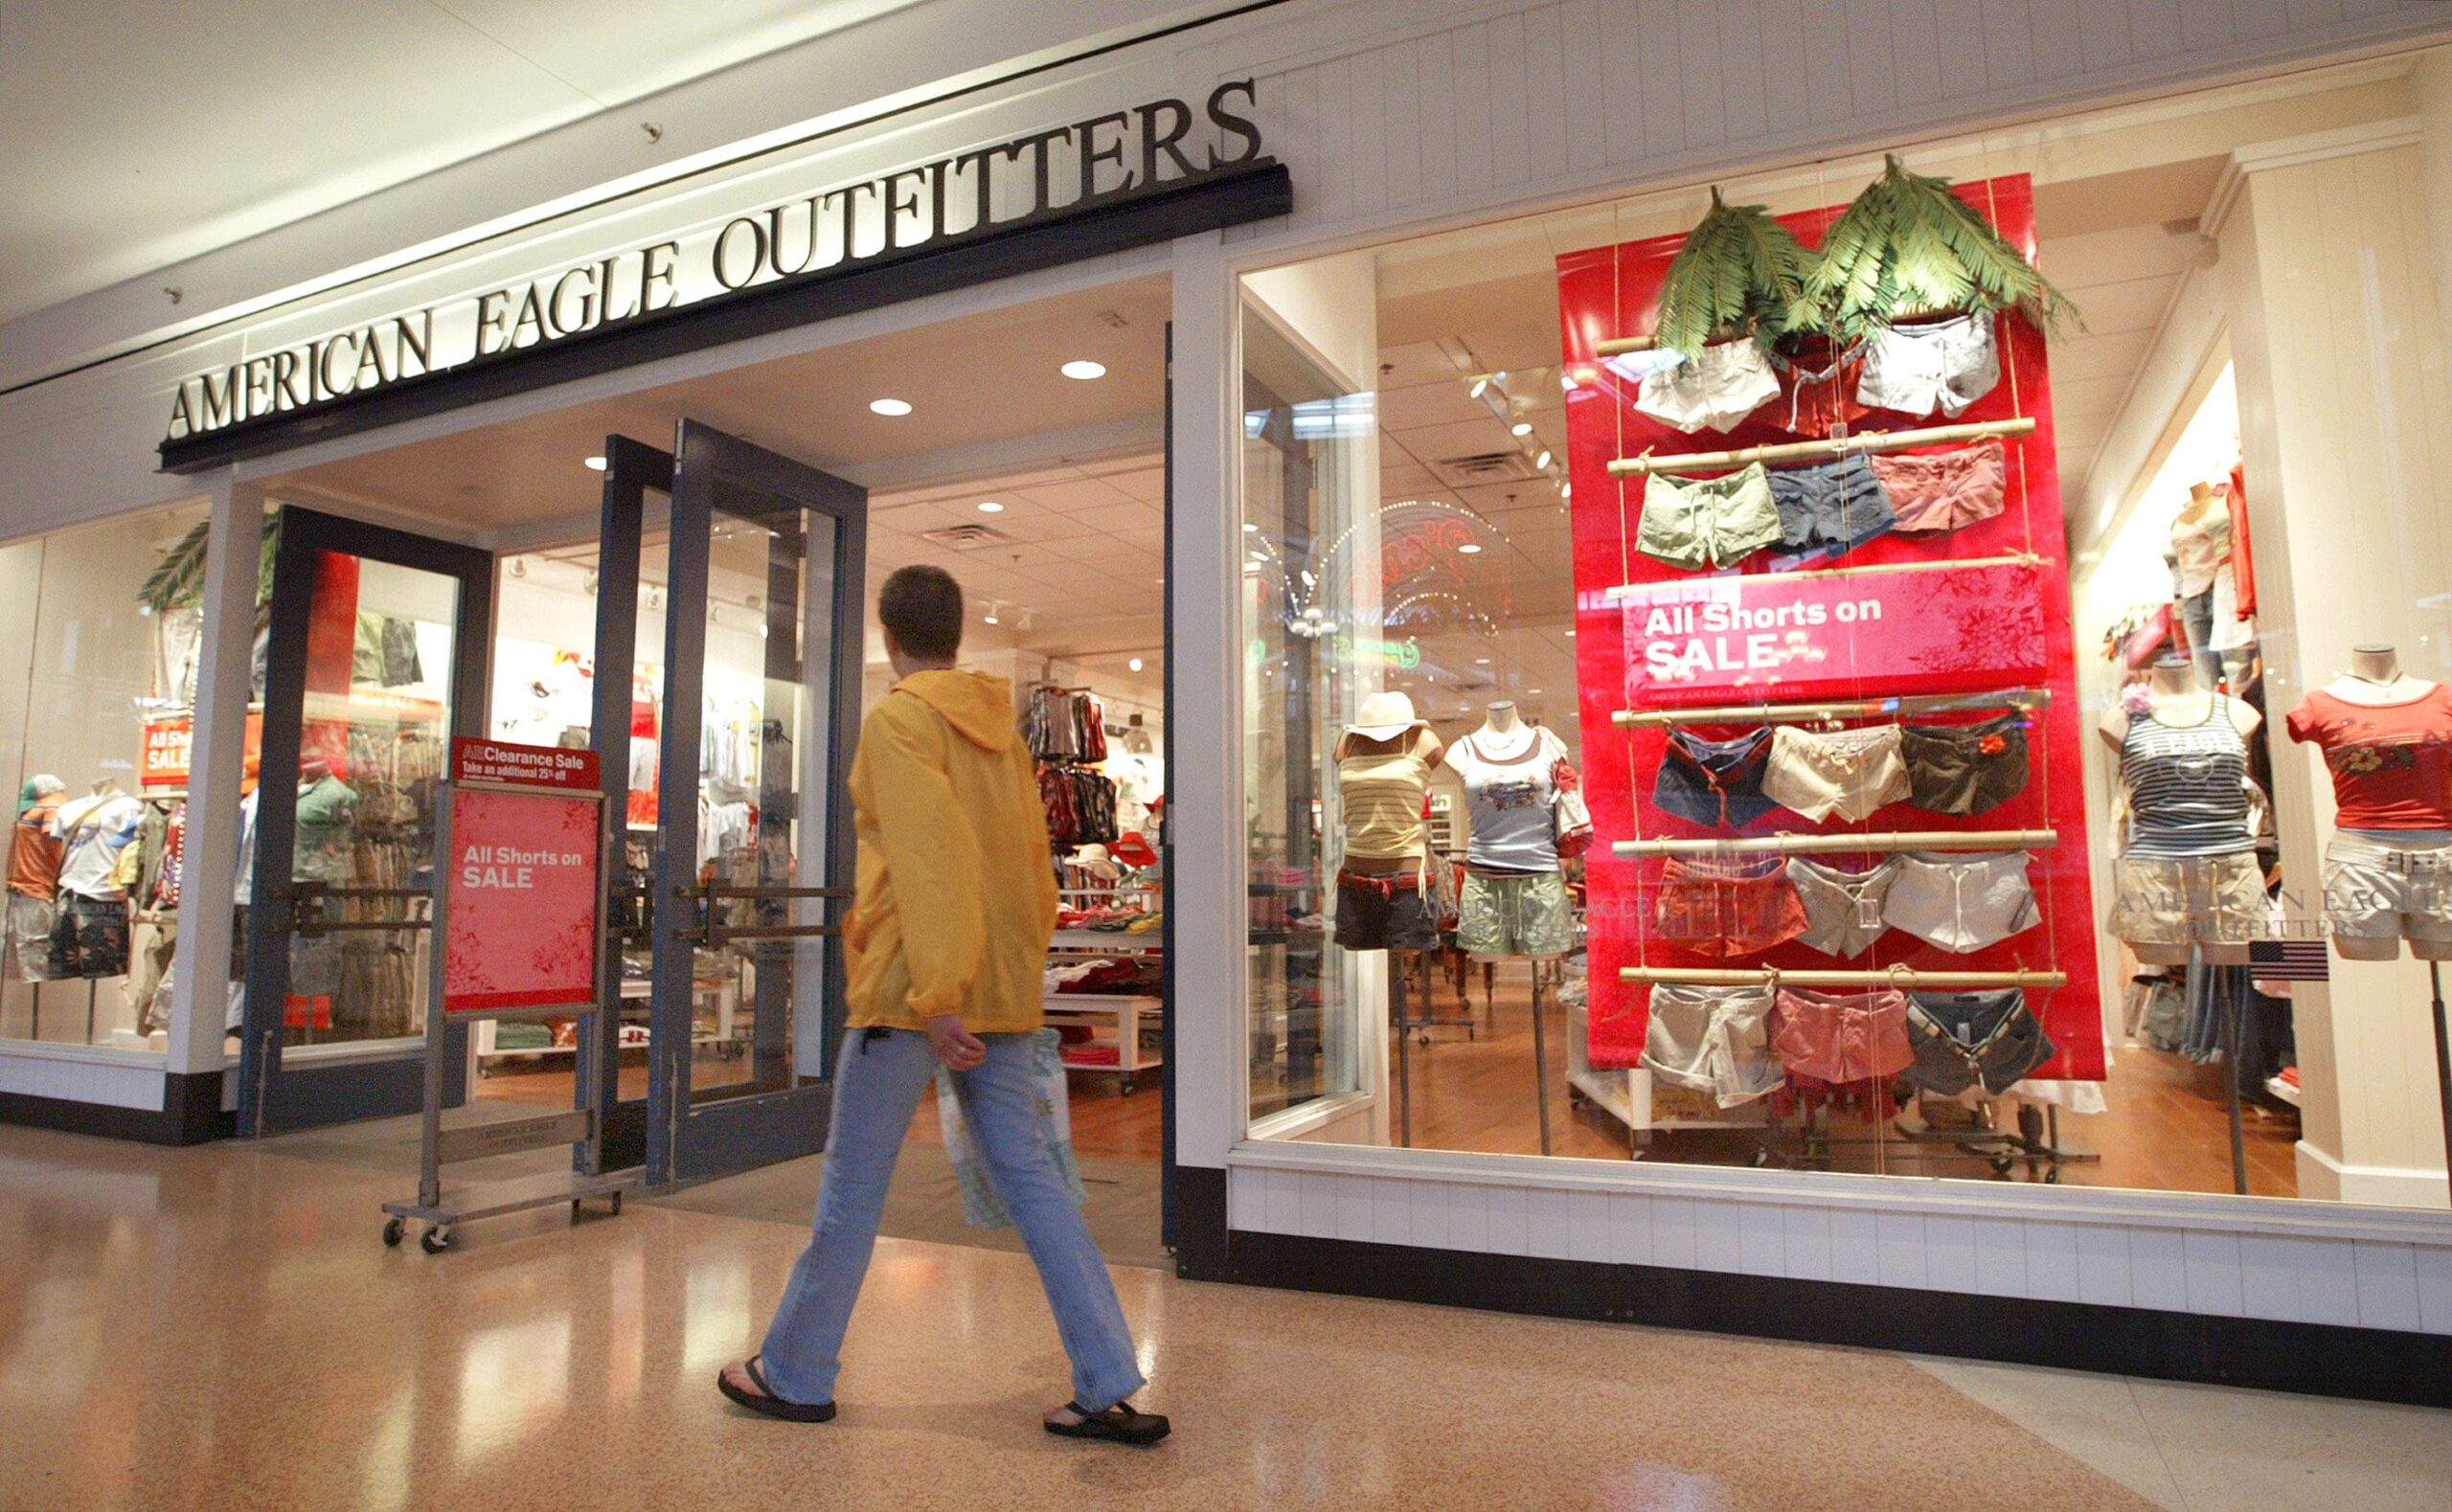 Investing Club: American Eagle Outfitters cautious guidance is rooted in temporary headwinds